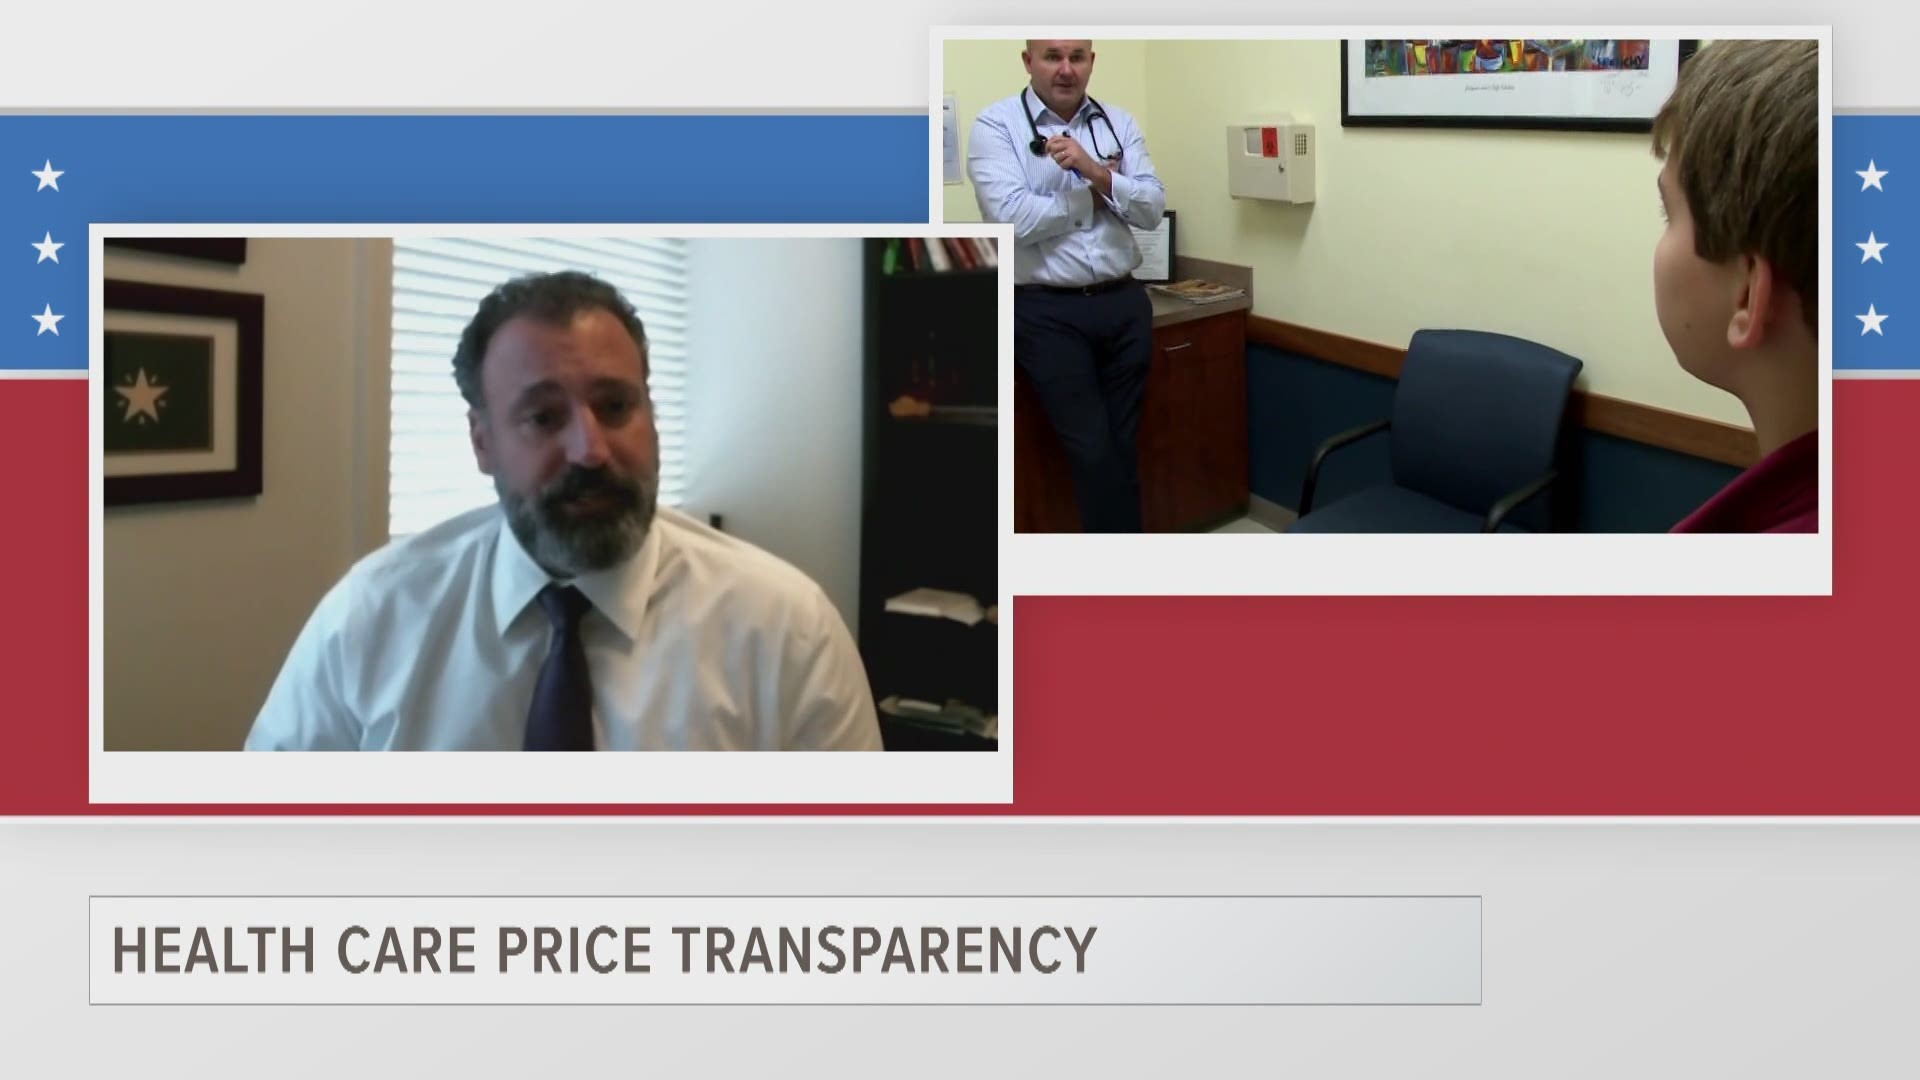 David Balat, a health care analyst for the Texas Public Policy Foundation, discusses why half of Texas hospitals do not meet the Hospital Price Transparency Rule